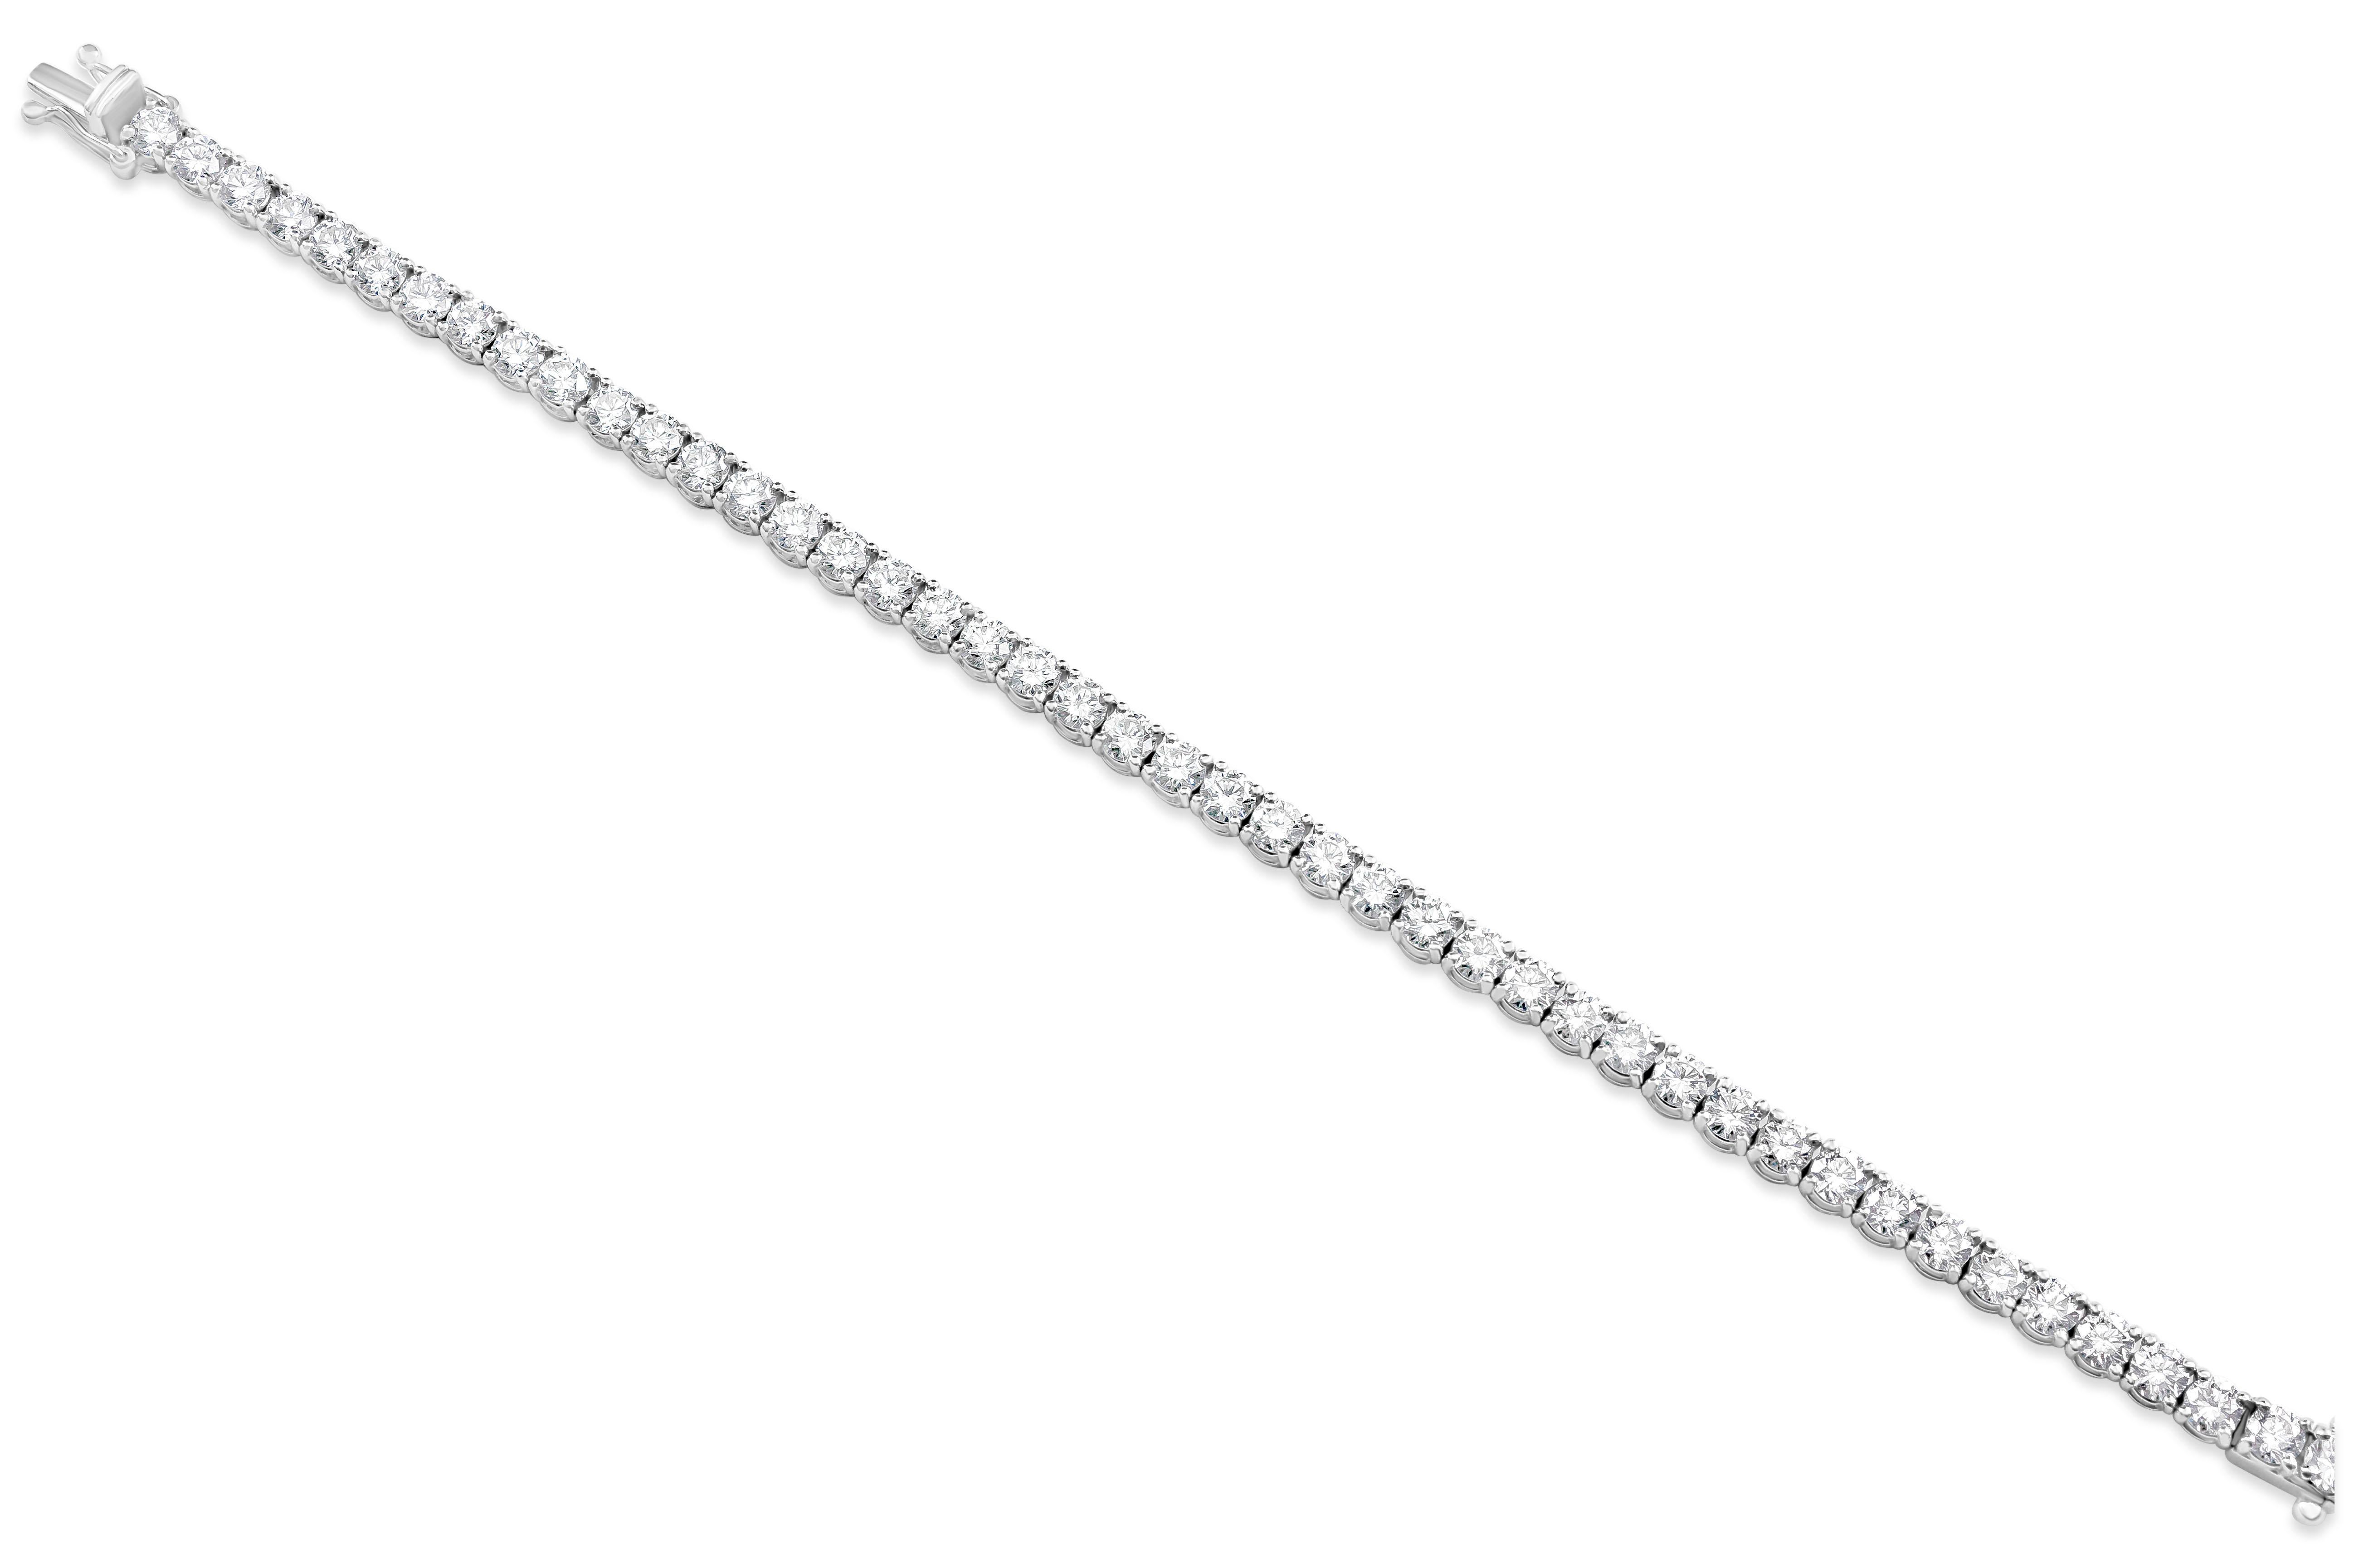 A timeless tennis bracelet design showcasing a line of round brilliant diamonds weighing 9.75 carats total. Made with 18K White Gold. 7.5 inches in Length. 

Style available in different price ranges. Prices are based on your selection. Please